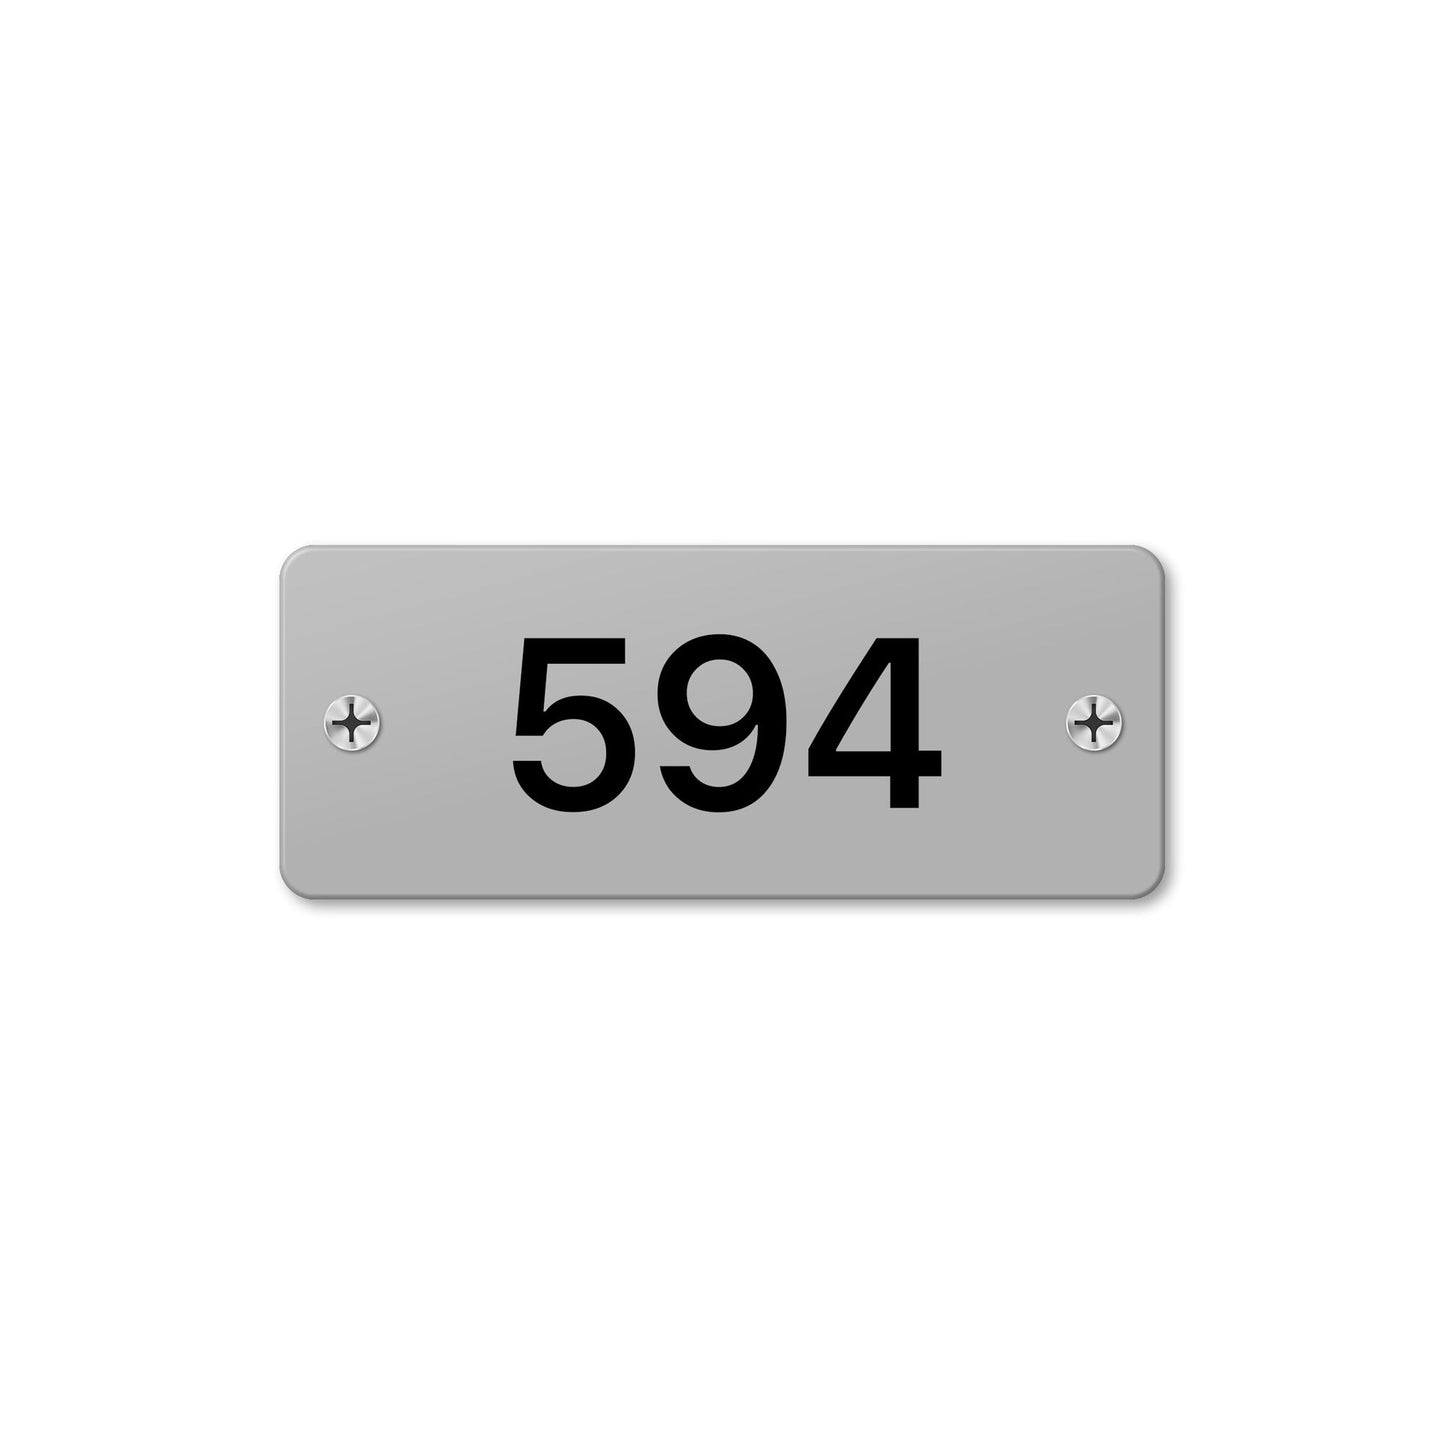 Numeral 594